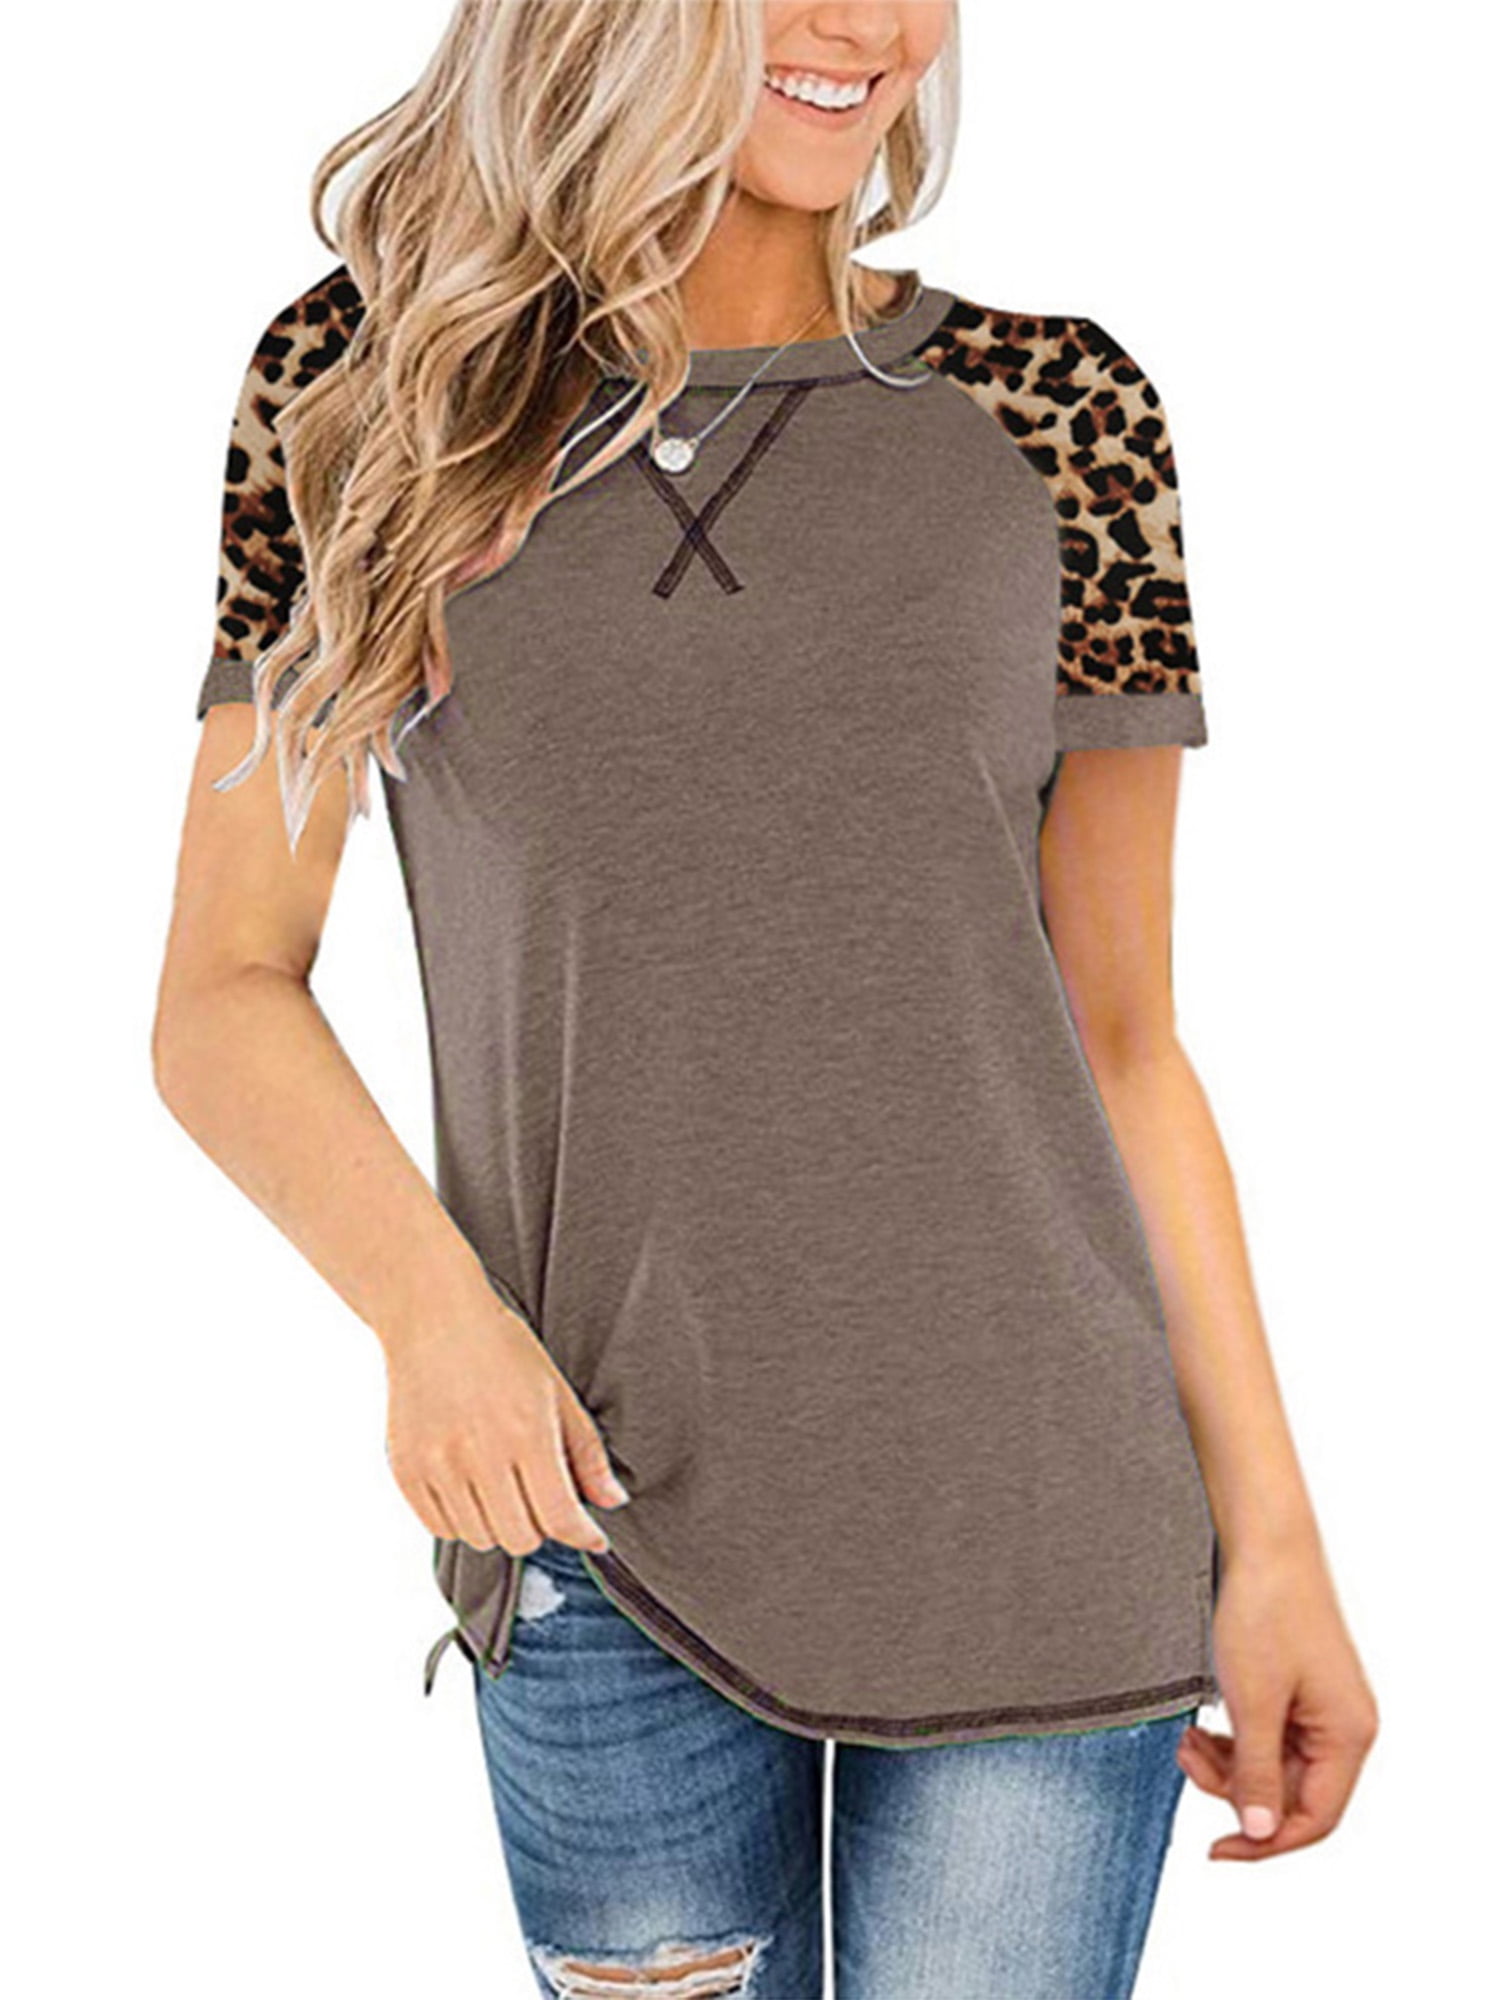 Miskely Womens Long Sleeve Casual Scoop Neck Tees Button Side Shirt Blouse Tunic Top 